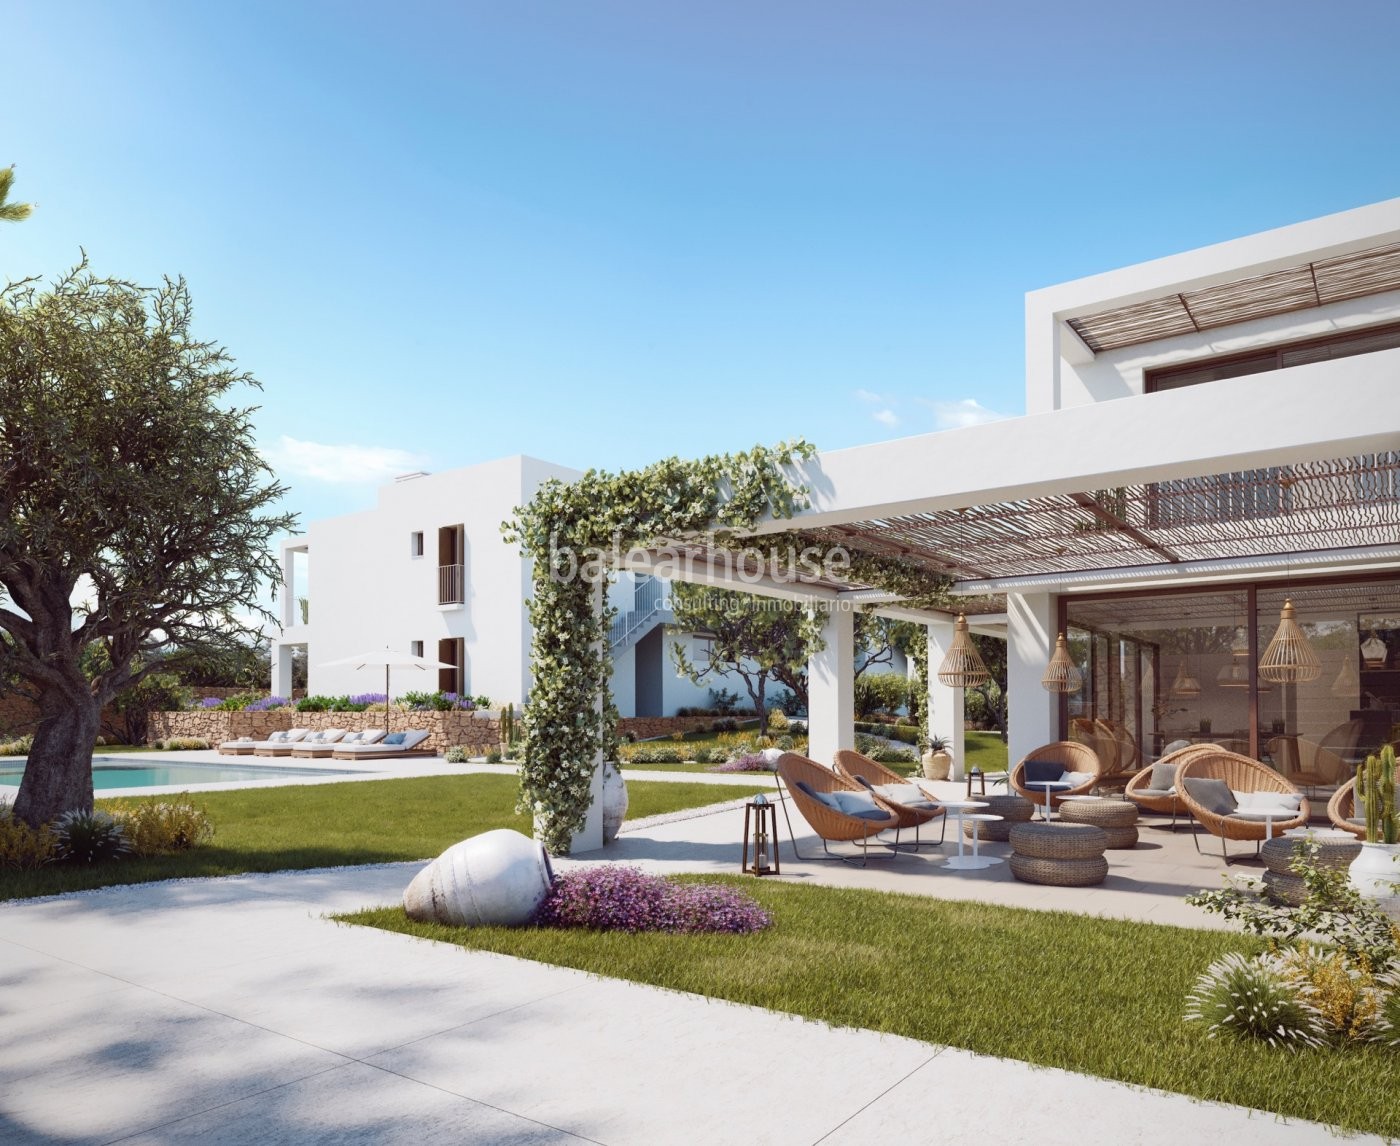 Brand new holiday homes in Formentera providing a natural connection to the beautiful surroundings.